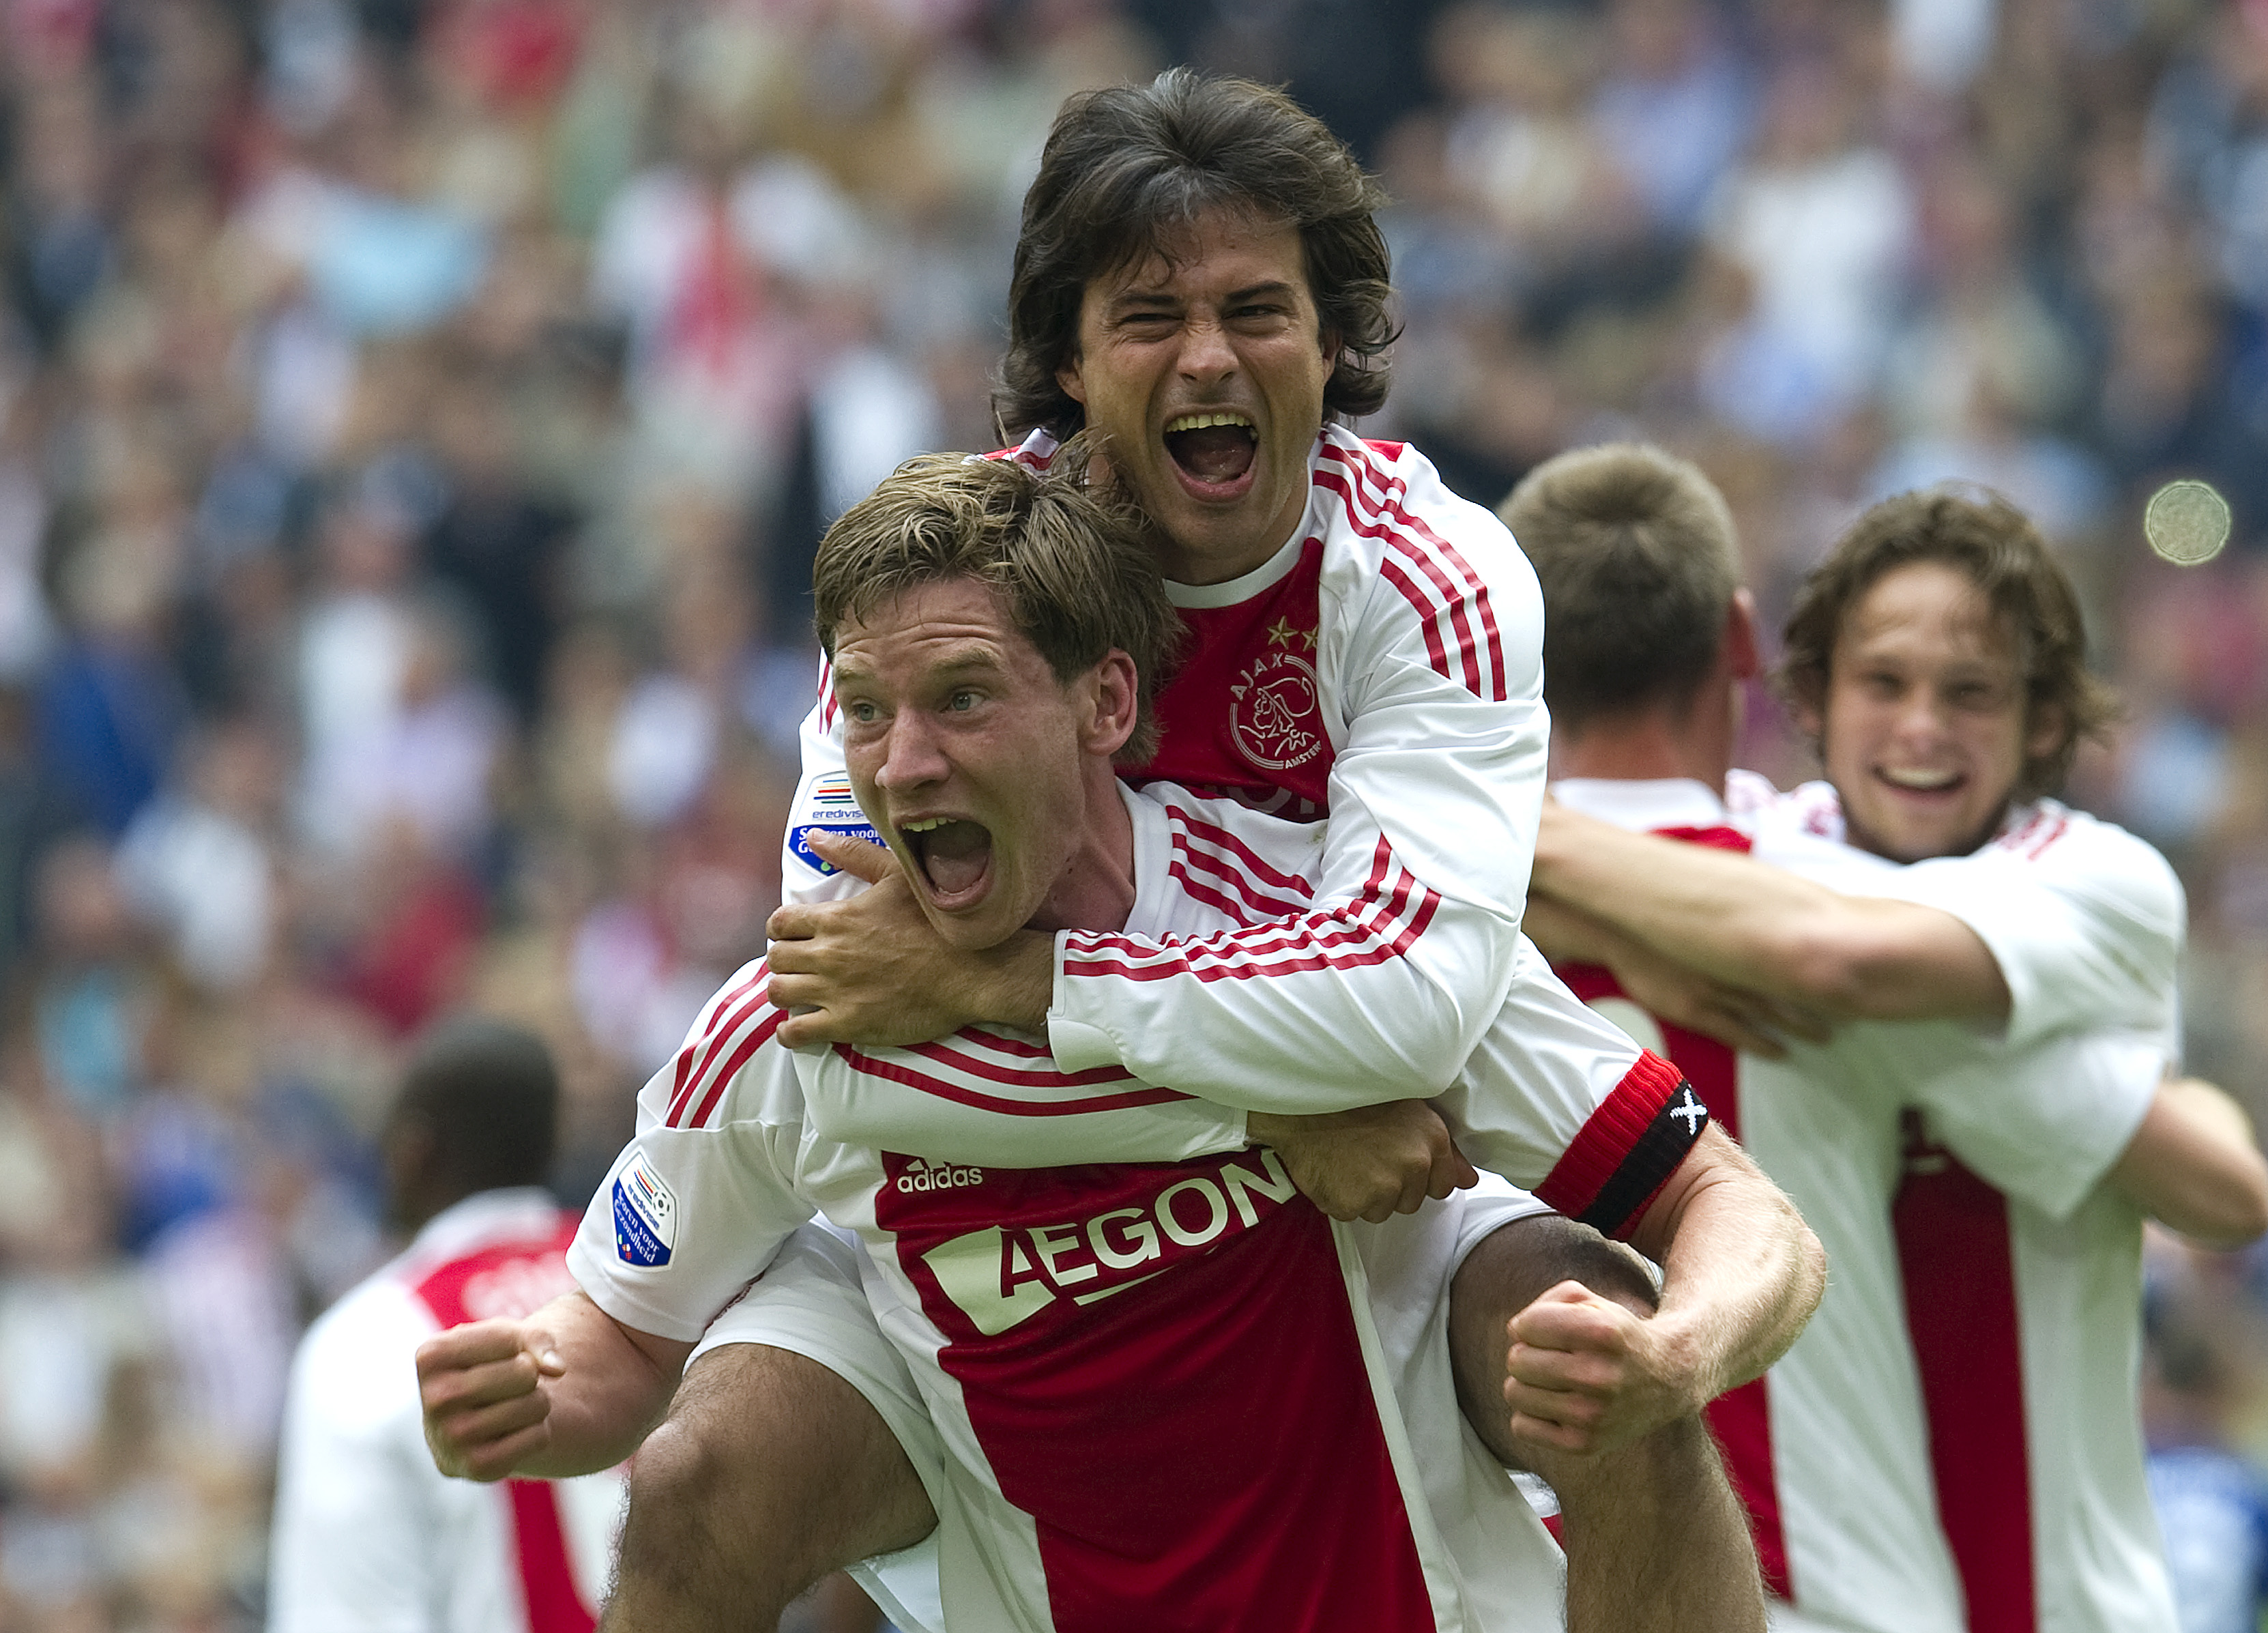 AMSTERDAM, THE NETHERLANDS - MAY 15:  Jan Vertonghen and Dario Cvitanich of Ajax Amsterdam celebrates during the Eridivisie match between Ajax Amsterdam and FC Twente at the Amsterdam Arena on May 15, 2010 in Amsterdam, The Netherlands.  (Photo by Toussai